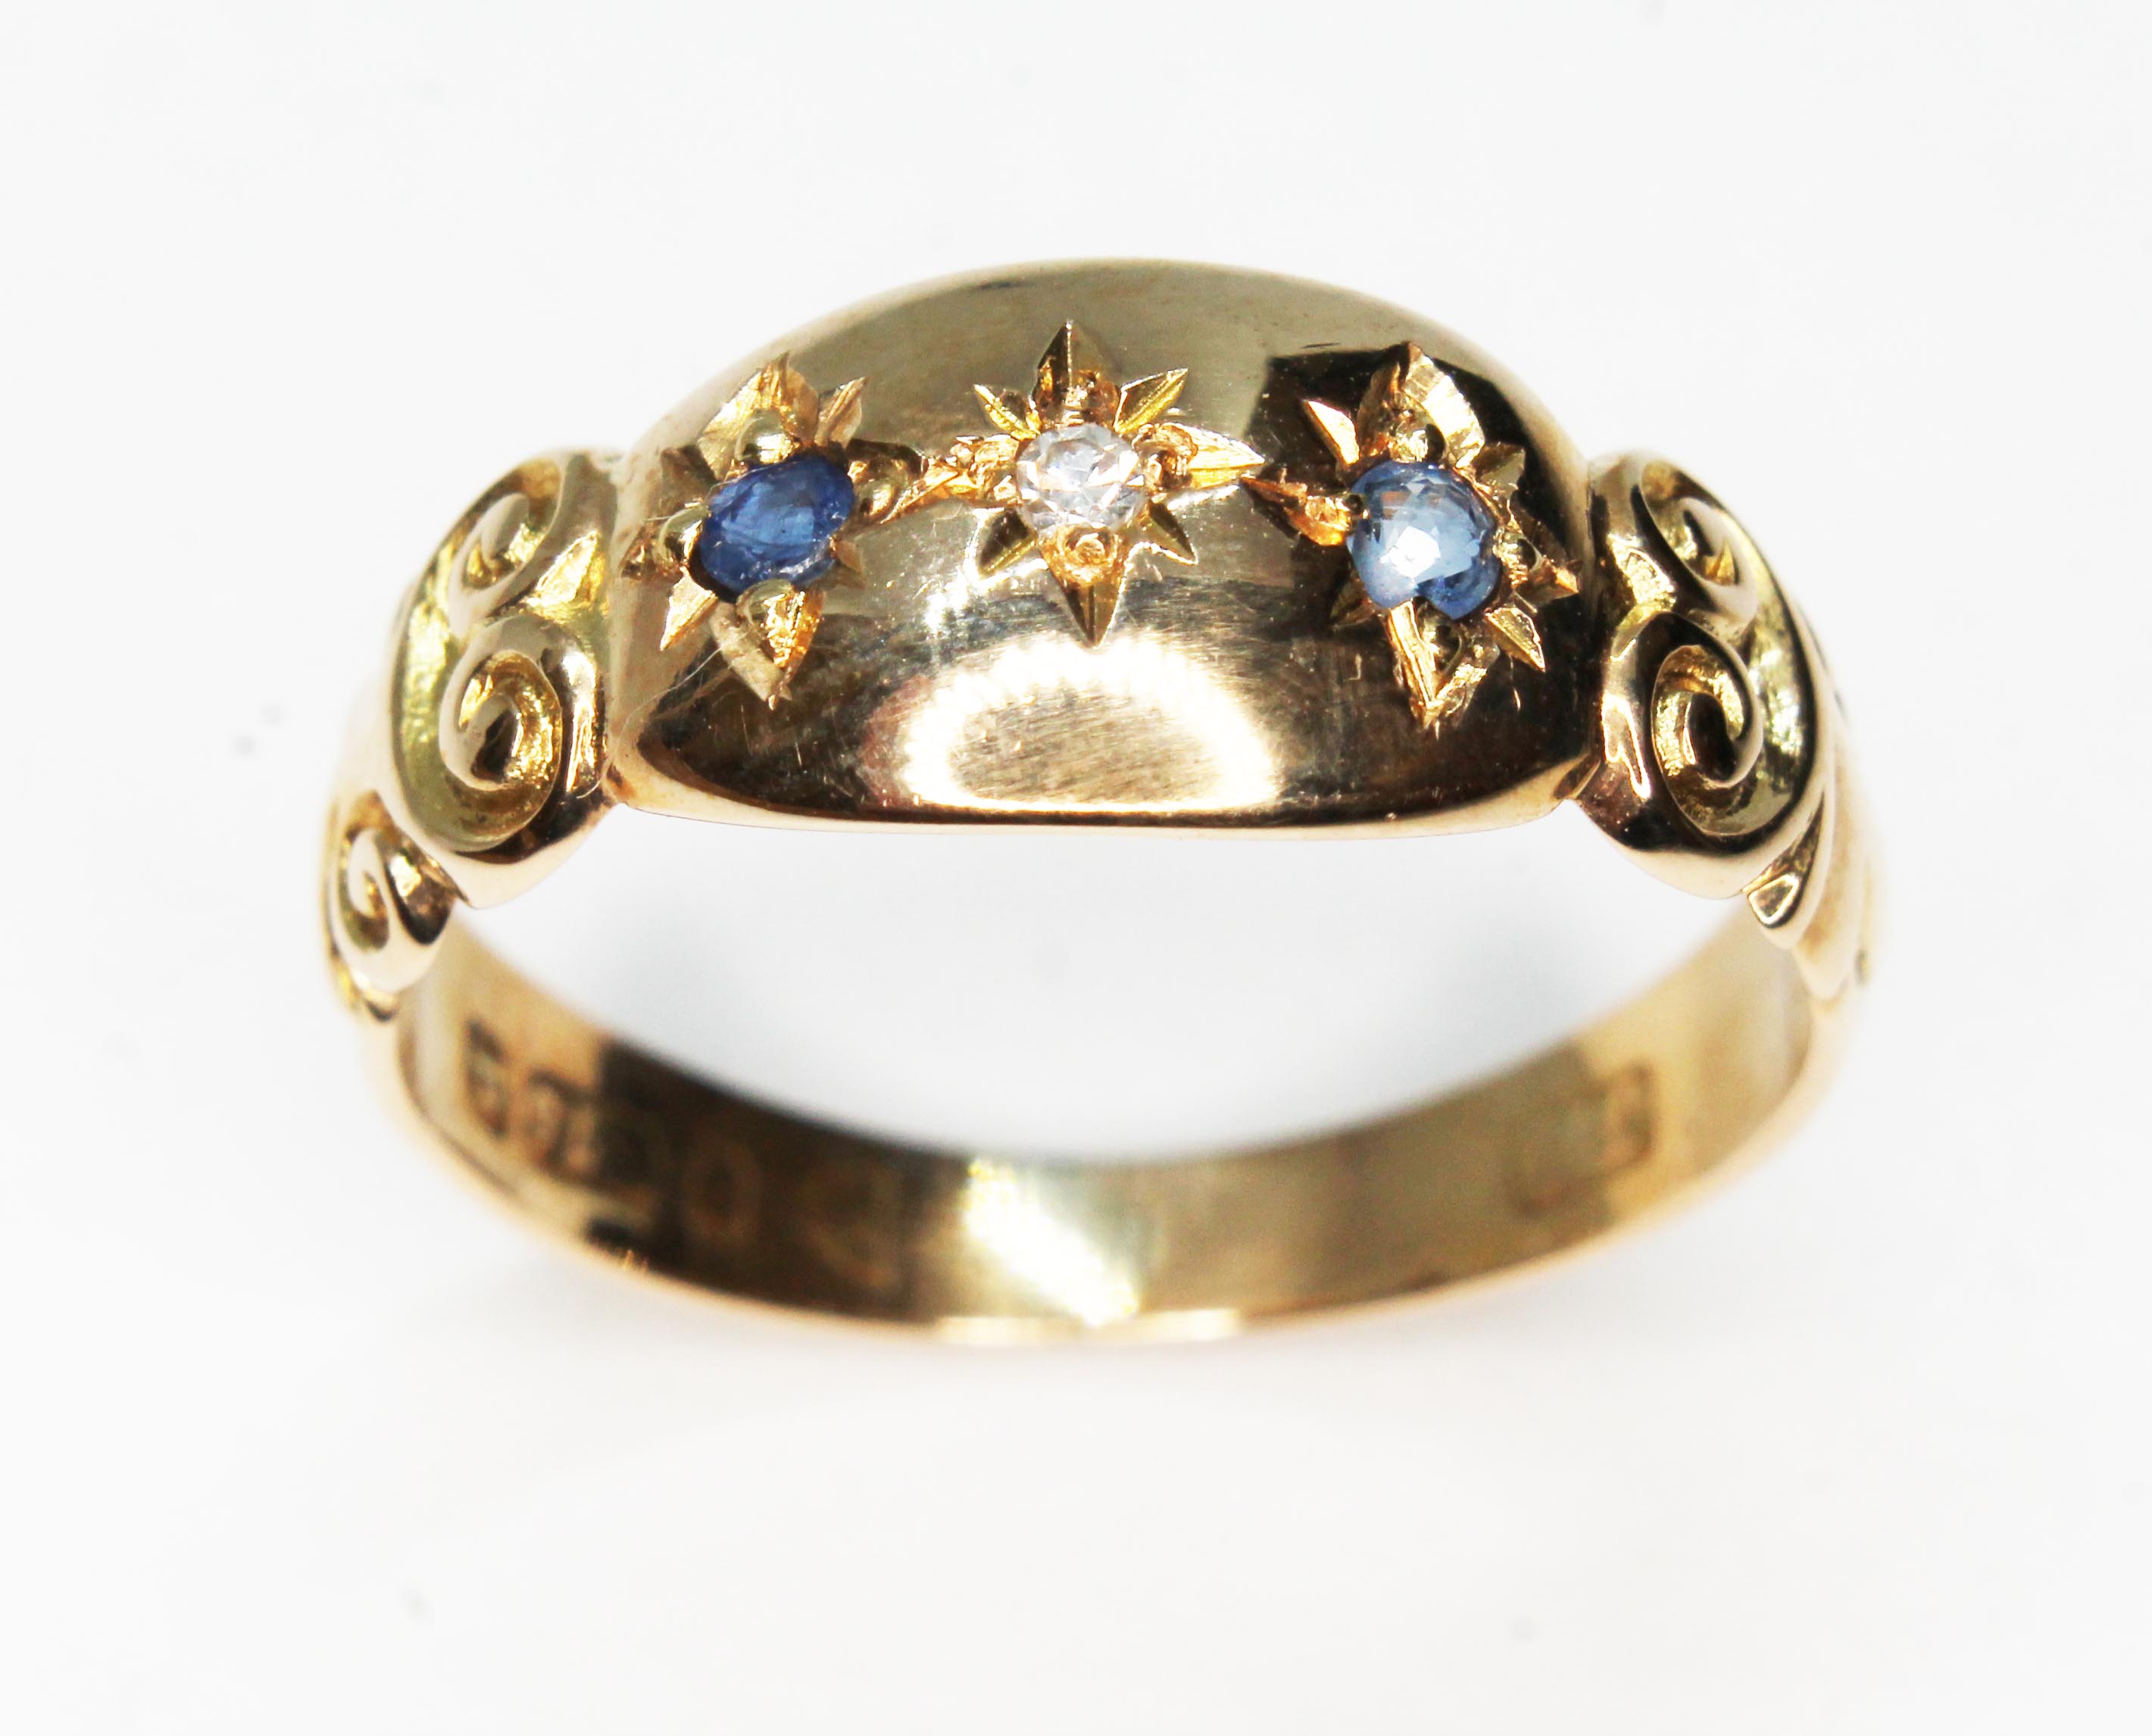 A late Victorian diamond and sapphire ring, sponsor's mark 'J.R', Chester 1898, gross wt. 2.3g, size